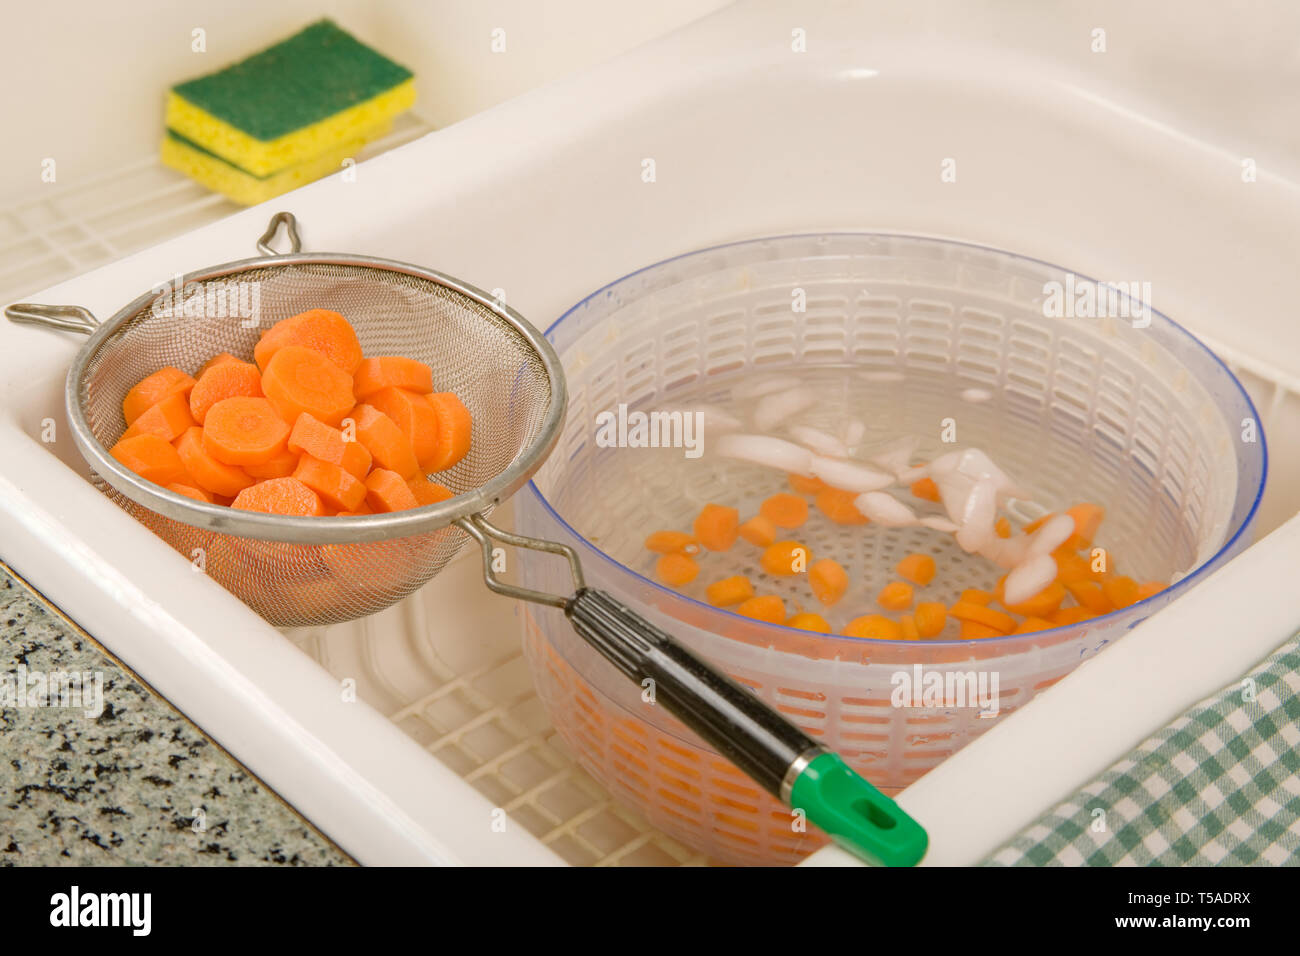 Blanching Vegetables In Large Cooking Pot Preparation Stock Photo -  Download Image Now - iStock